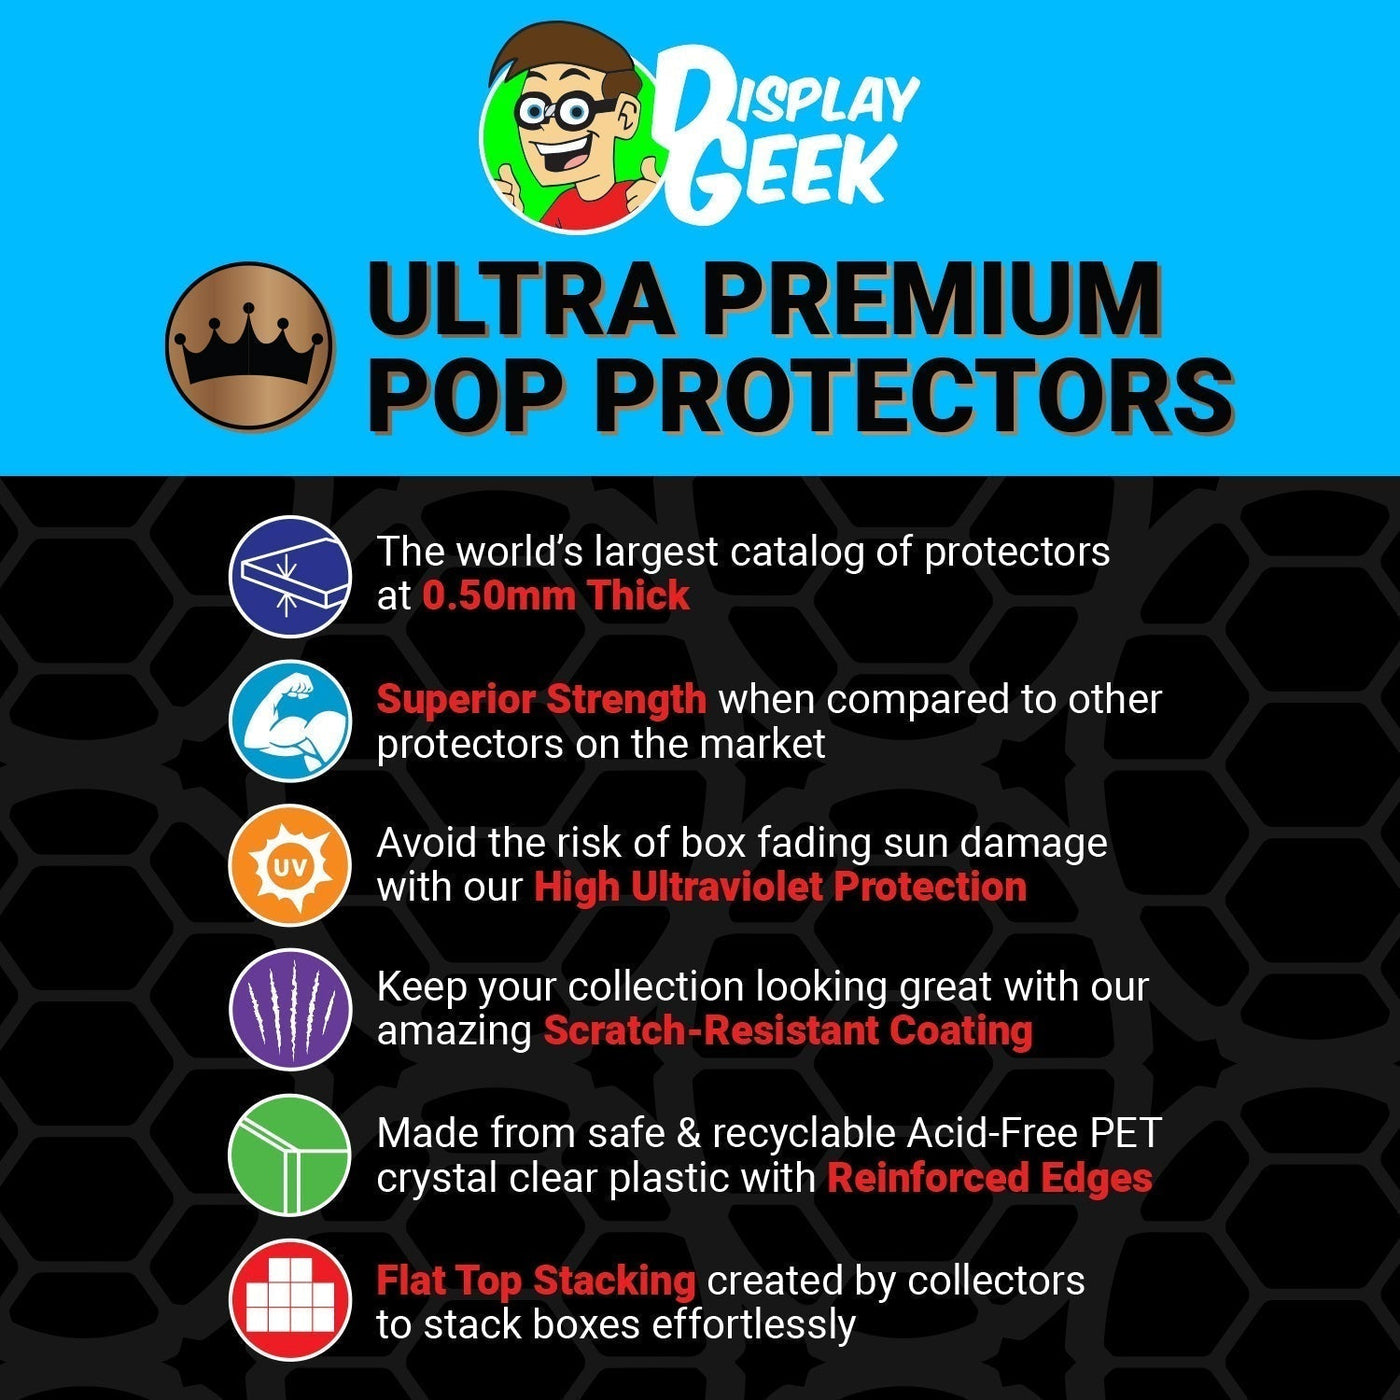 Pop Protector for 2 Pack Donna & Ben Treat Yo' Self Funko Pop on The Protector Guide App by Display Geek